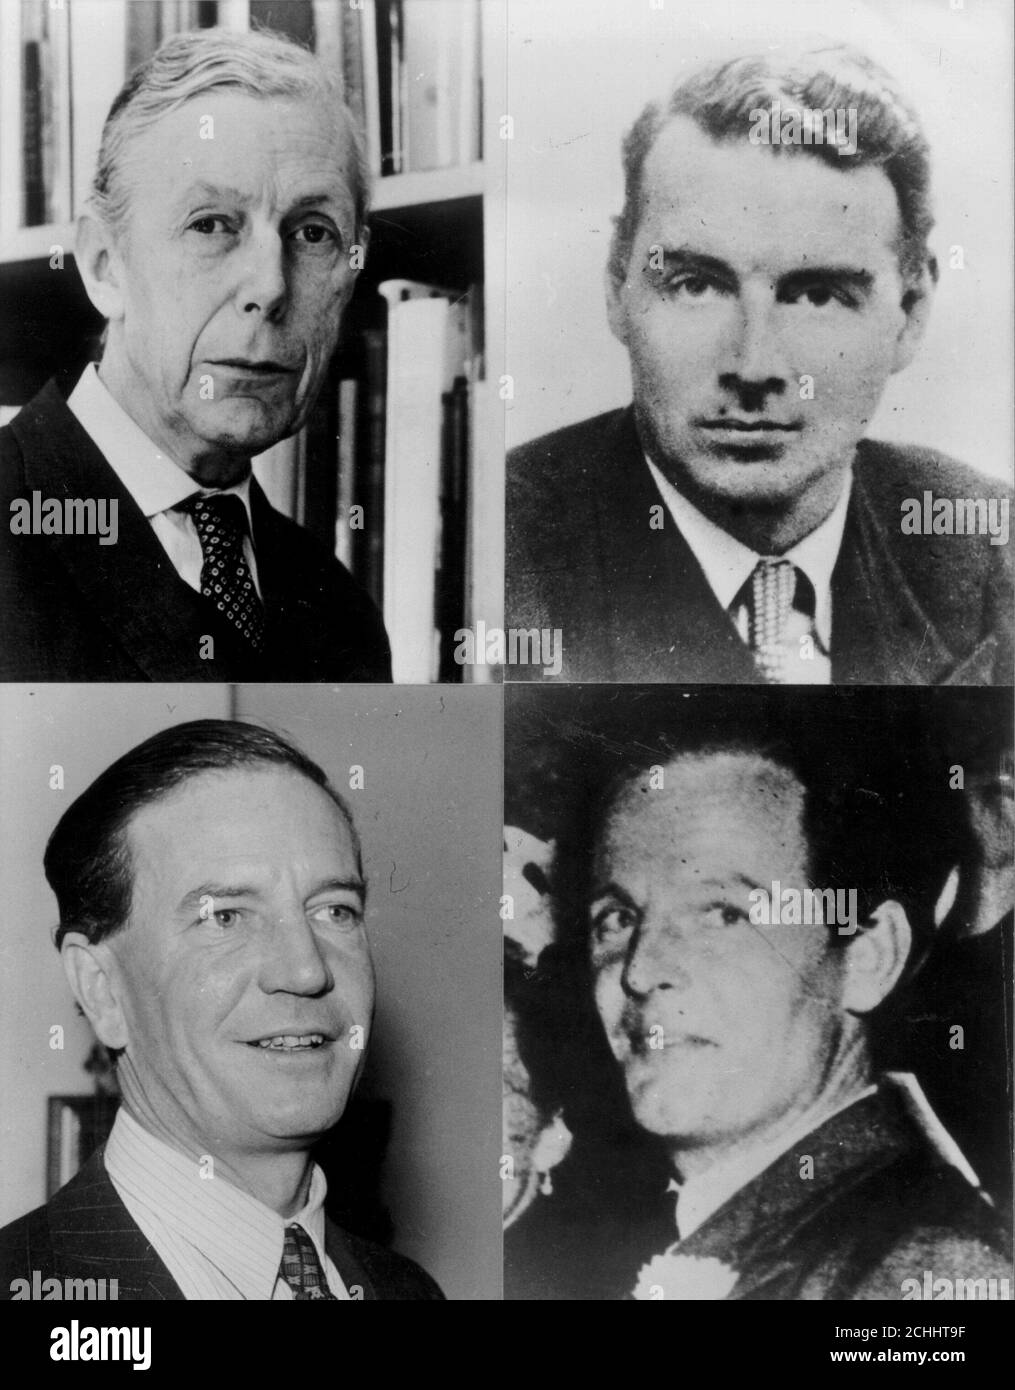 Clockwise from top left: Anthony Blunt, Guy Burgess (who died in Moscow in 1963), Donald MacLean and Kim Philby, who tipped off Burgess and MacLean in 1951 forcing them to defect and then defecting himself in 1963. Blunt's treachery as a recruiter for the KGB at Cambridge in the 1930s was exposed in 1979, but he escaped prosecution. **The Anthony Blunt image is not for use by television** Stock Photo